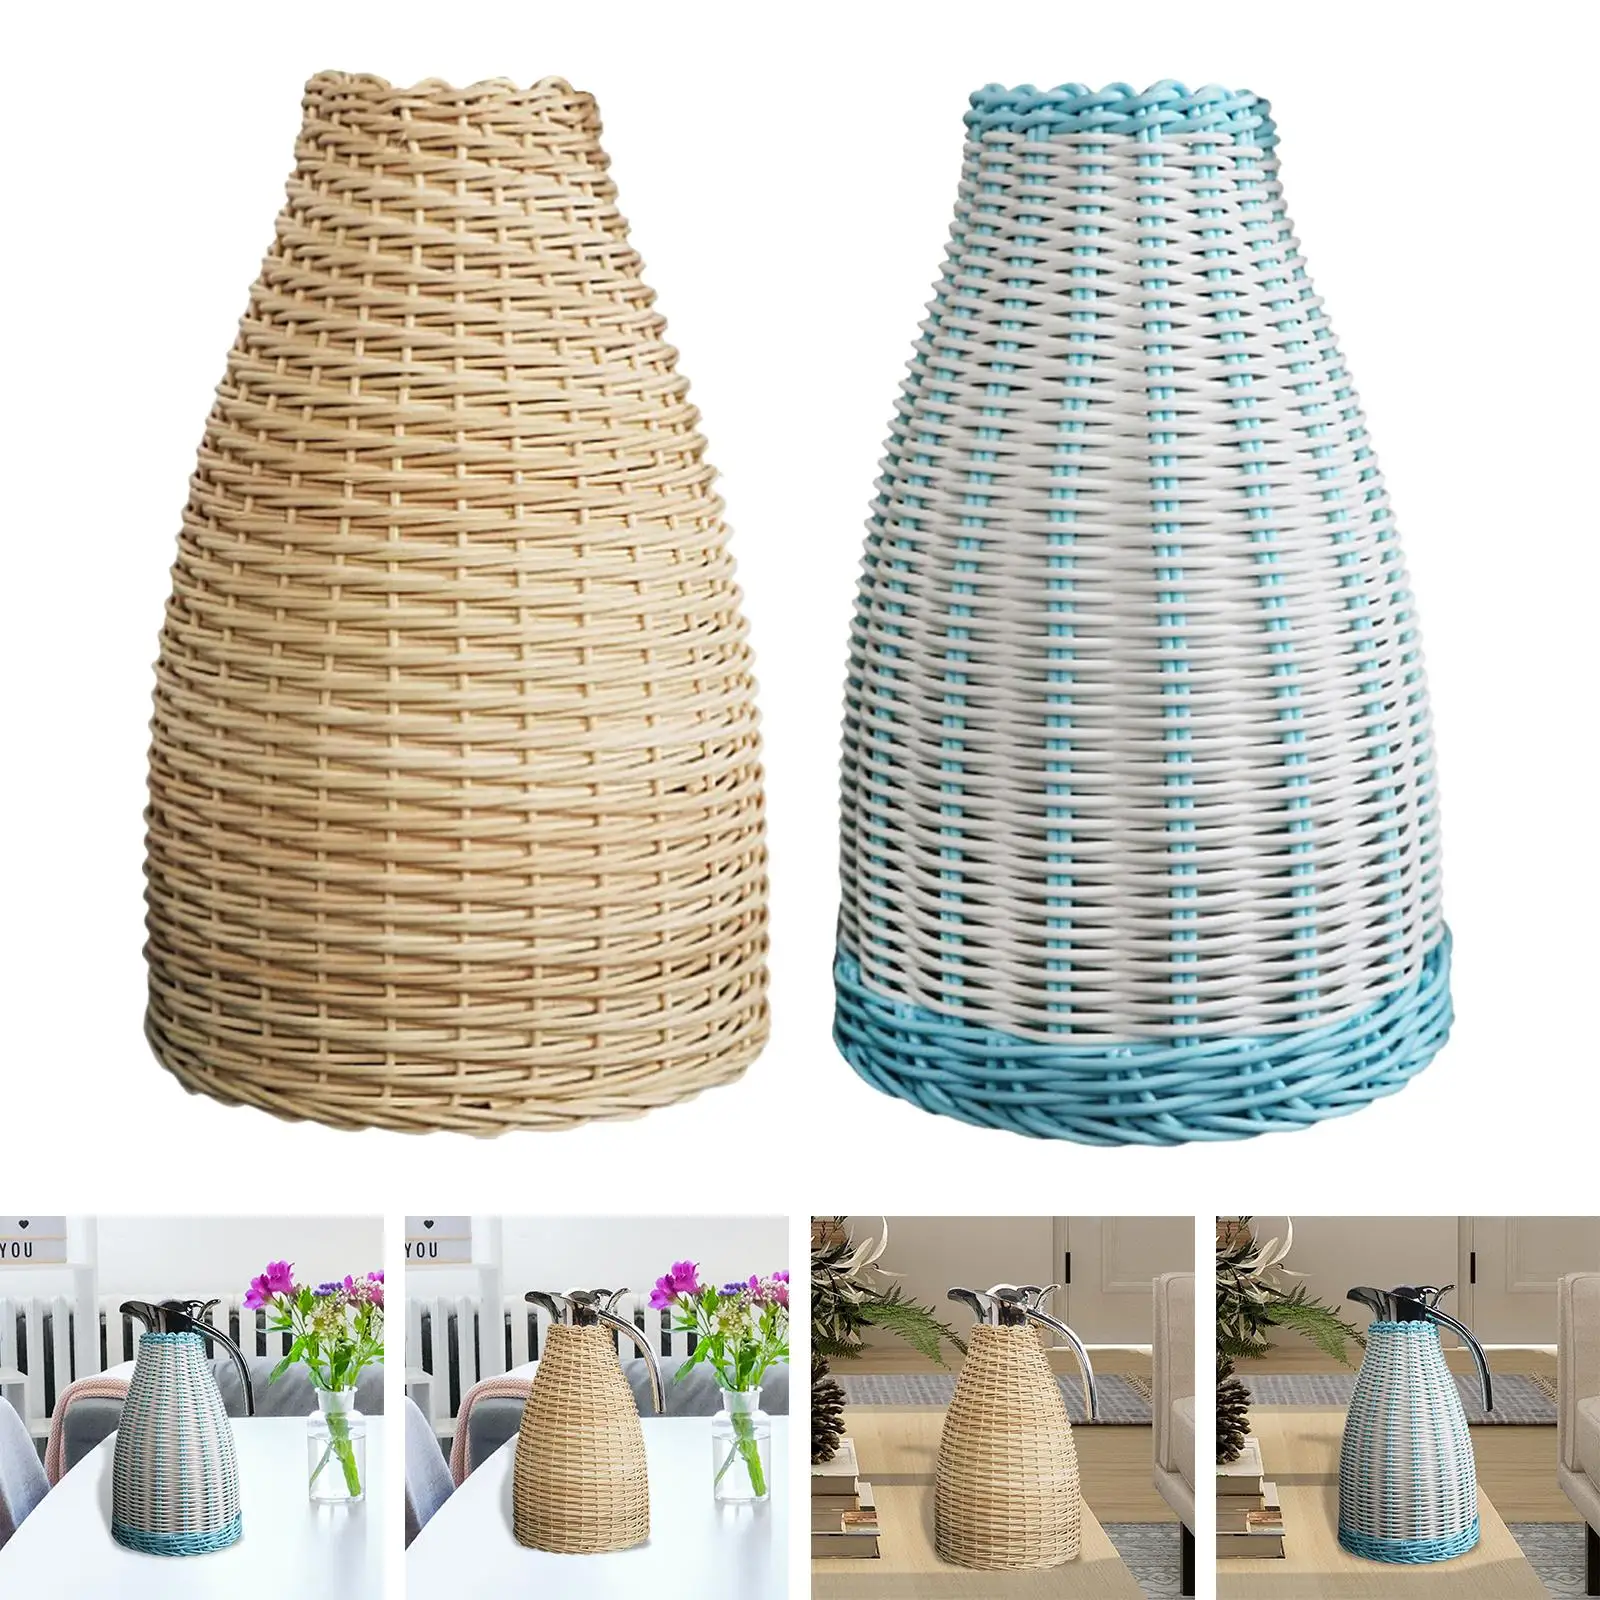 Water Bottle pouch Rustic Thermal Jug Decorative Home Decoration Bottle slings Holder for Windows Chairs Sidings Roofs